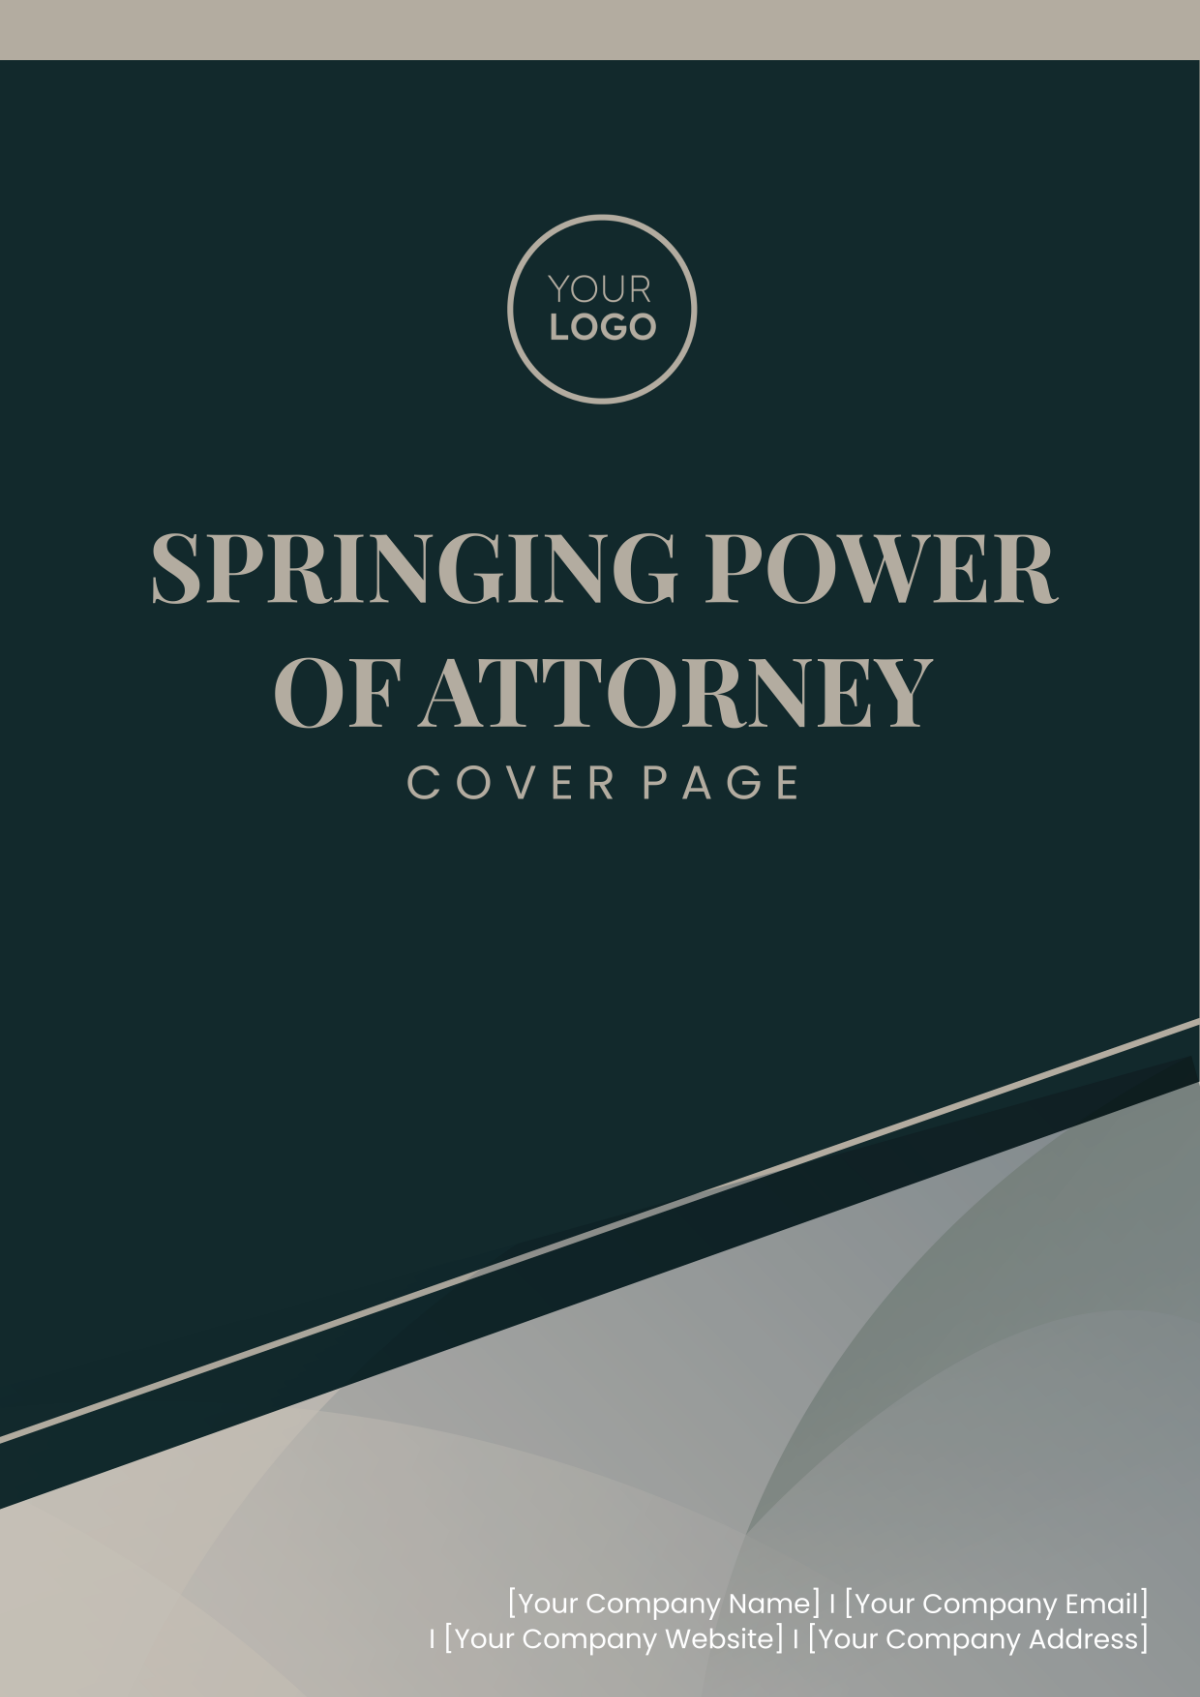 Springing Power of Attorney Cover Page